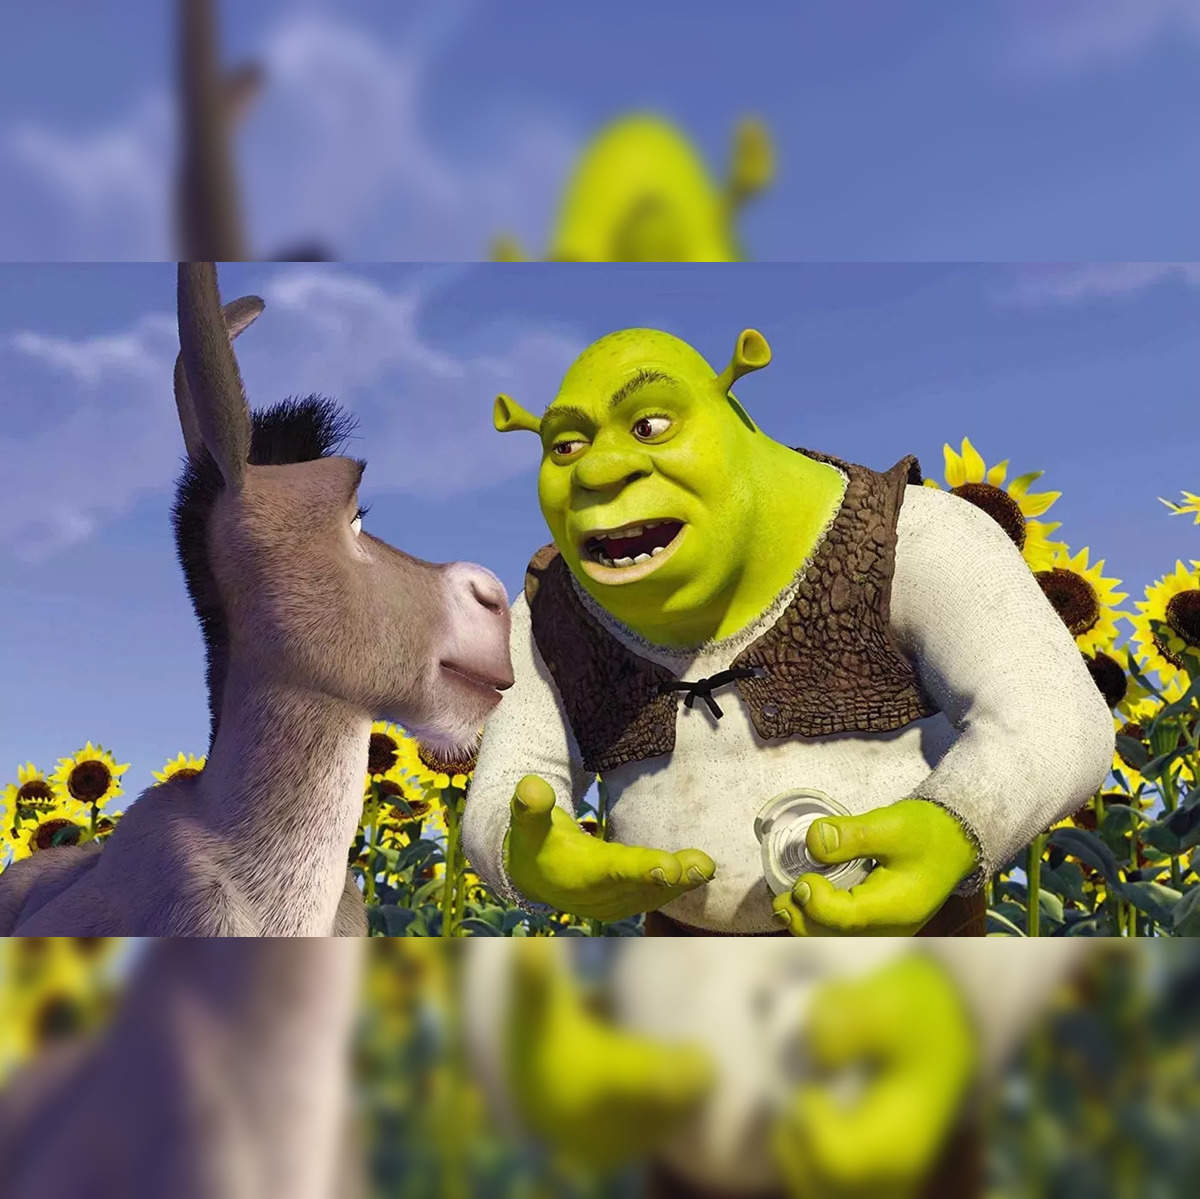 Shrek Forever After: Pied piper scenes 